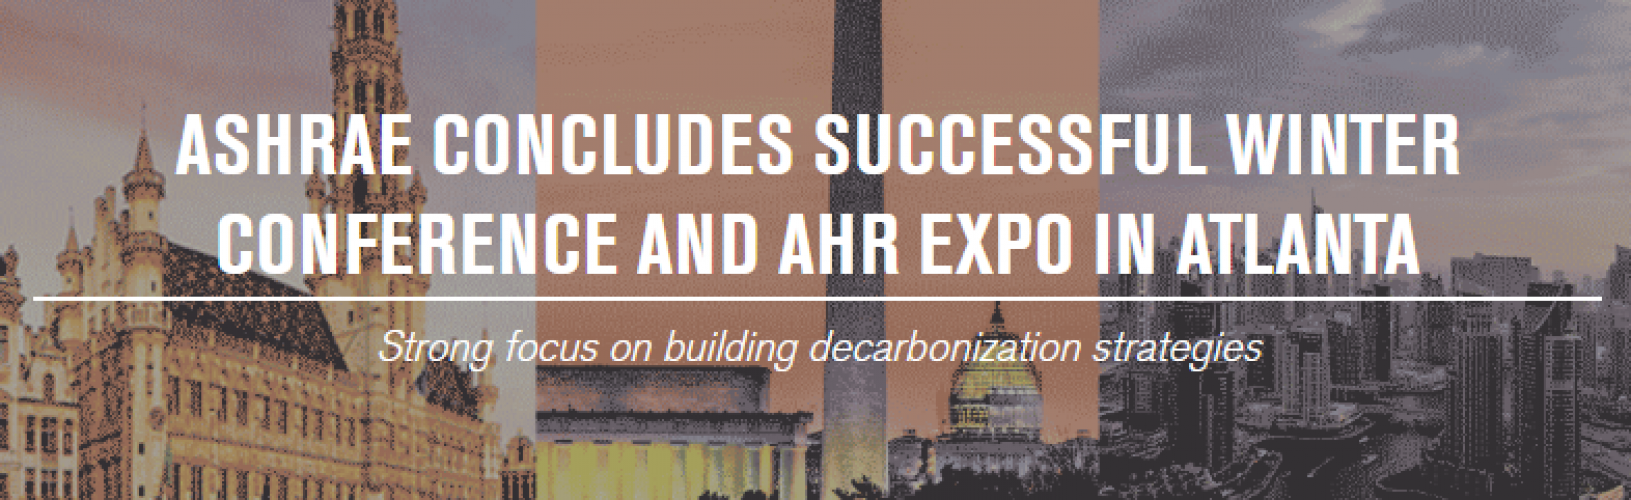 ashrae-concludes-successful-winter-conference-and-ahr-expo-in-atlanta